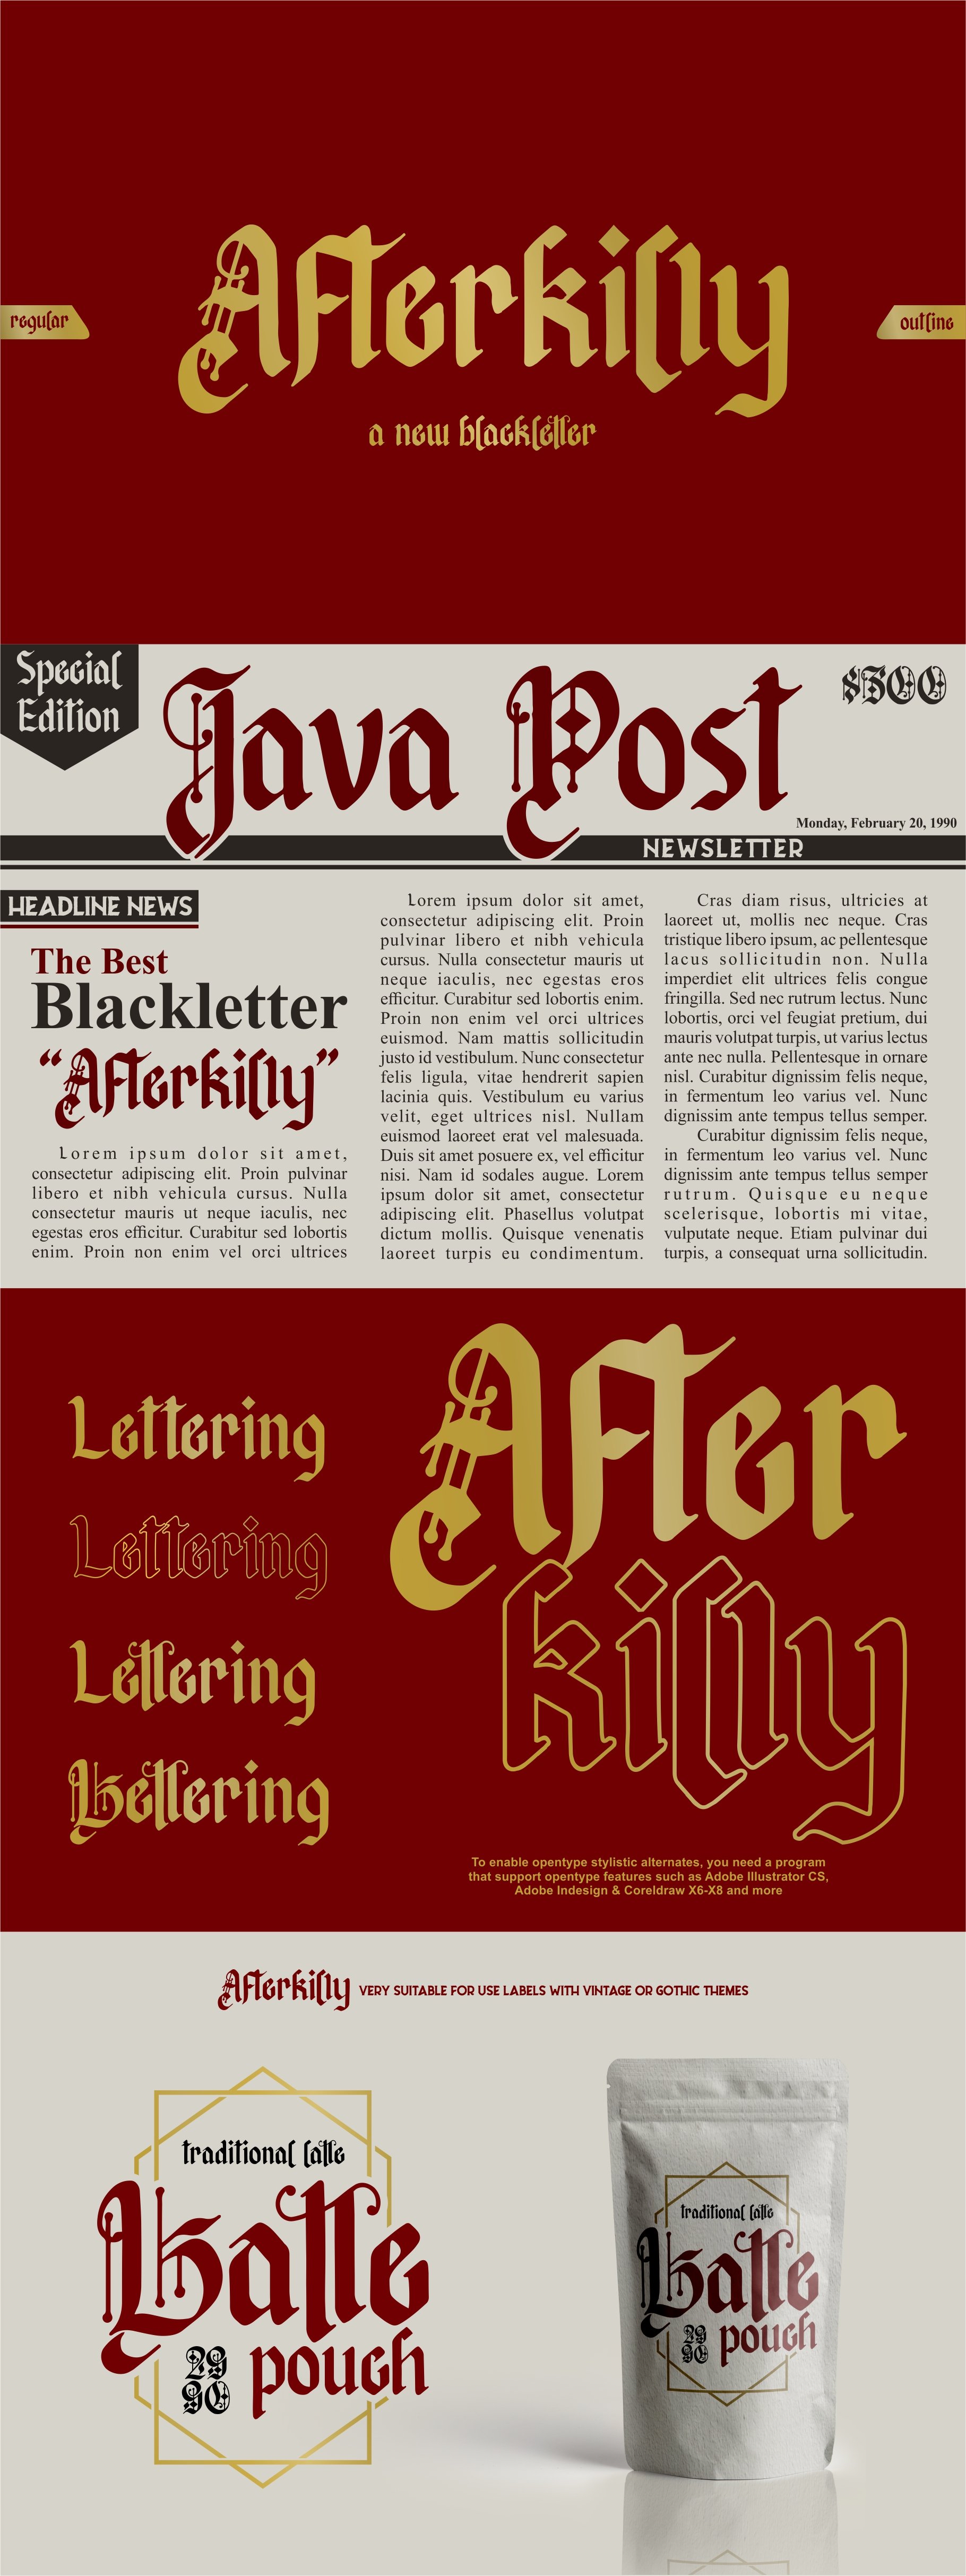 Afterkilly - Blackletter Typeface cover image.